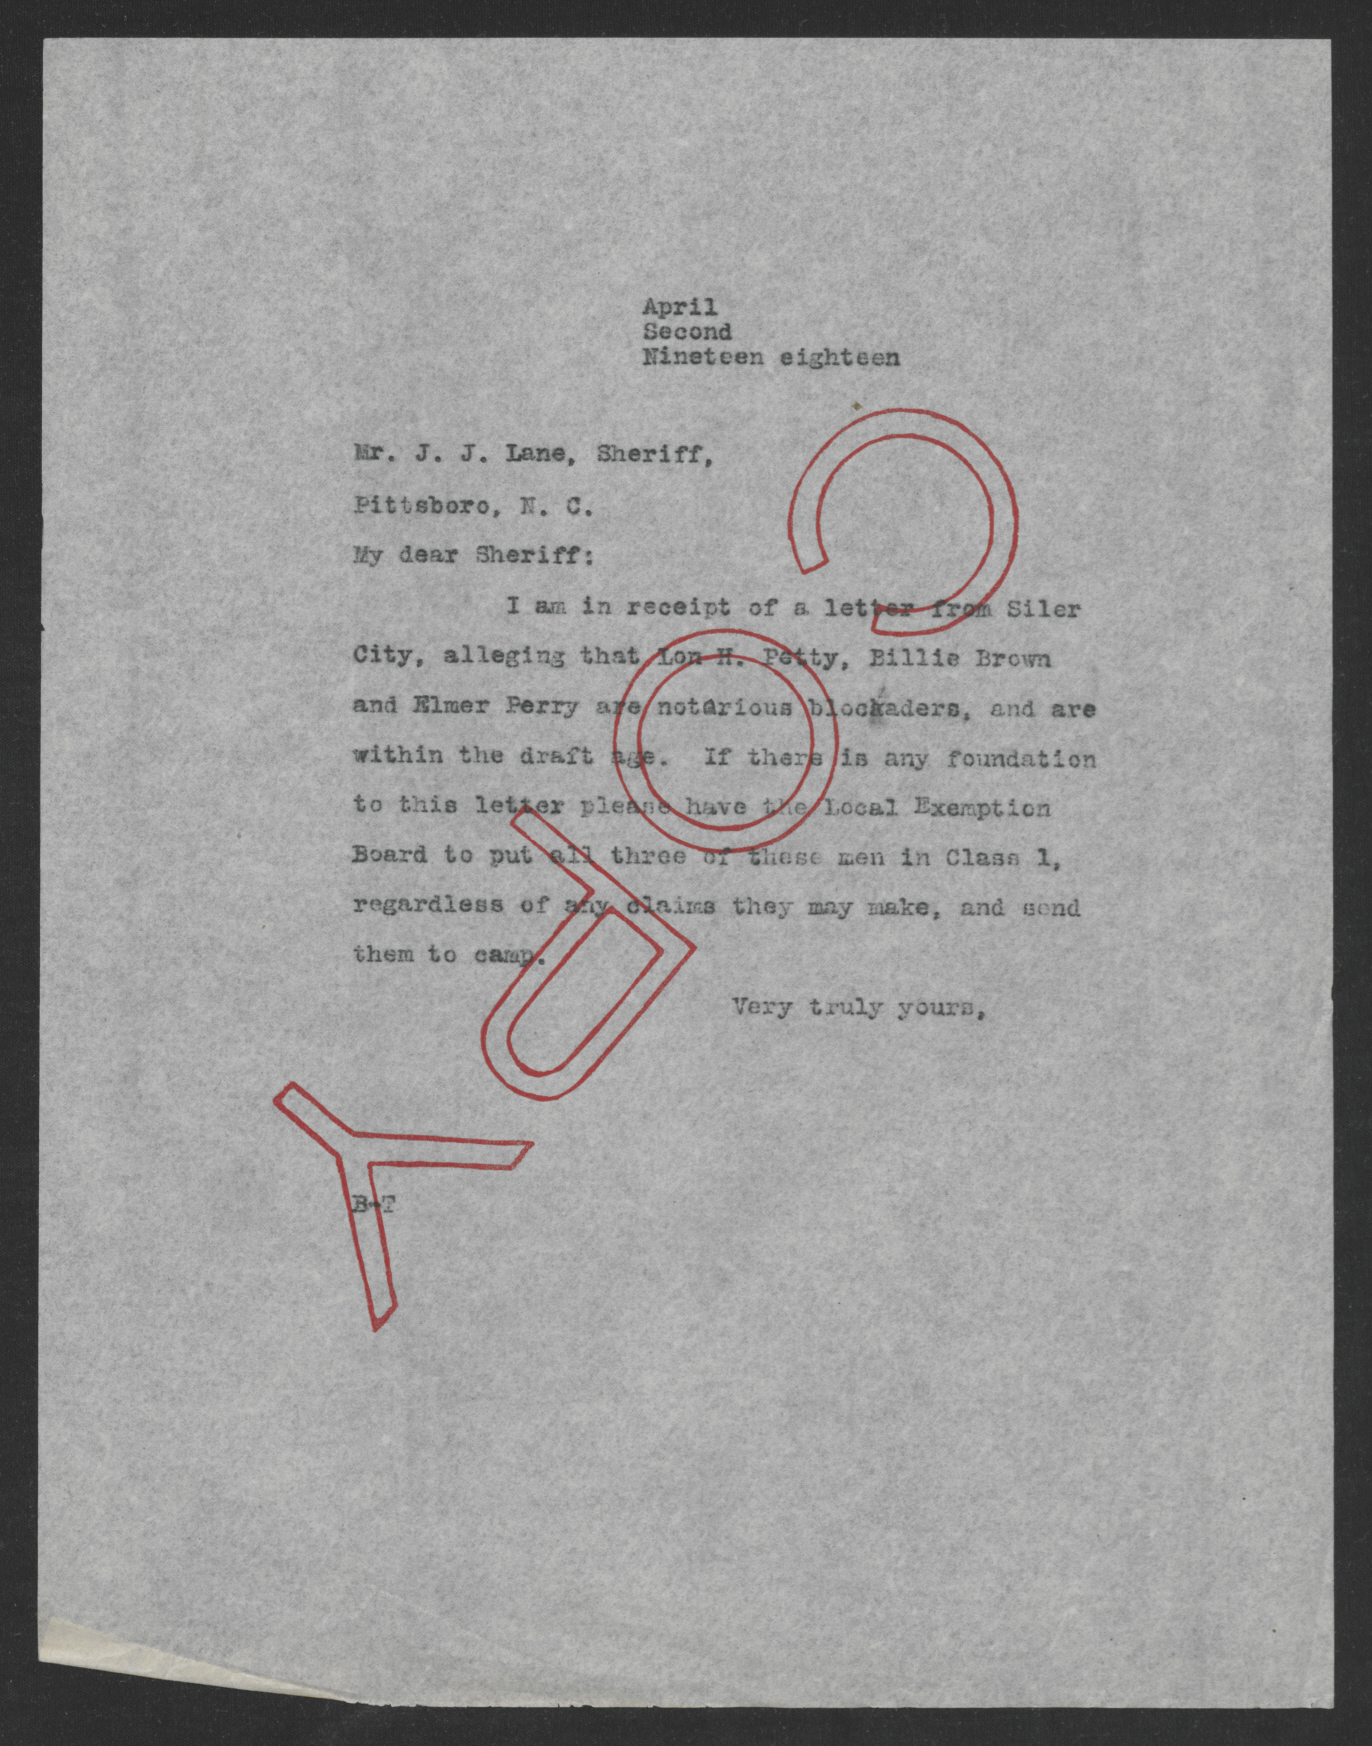 Letter from Thomas W. Bickett to Leon T. Lane, April 2, 1918